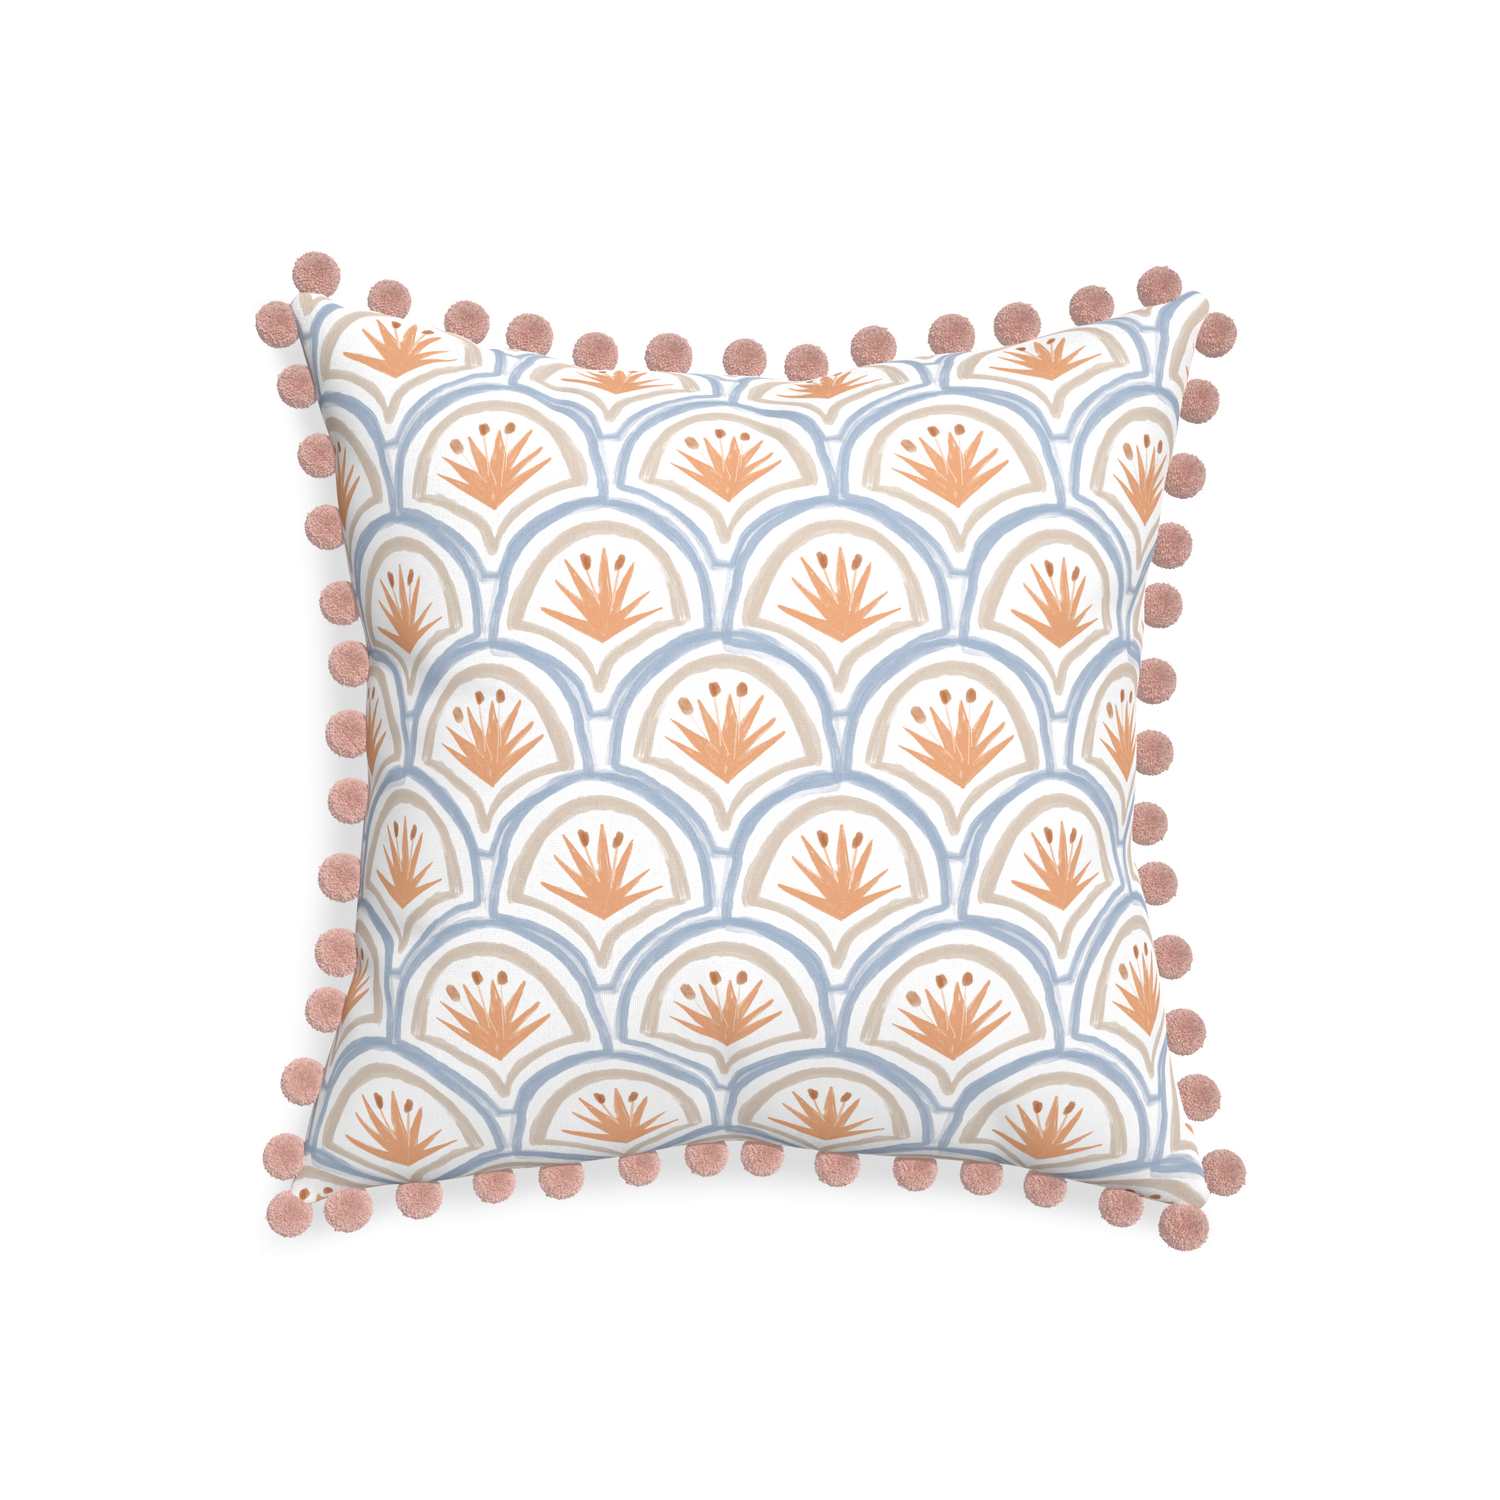 20-square thatcher apricot custom art deco palm patternpillow with rose pom pom on white background